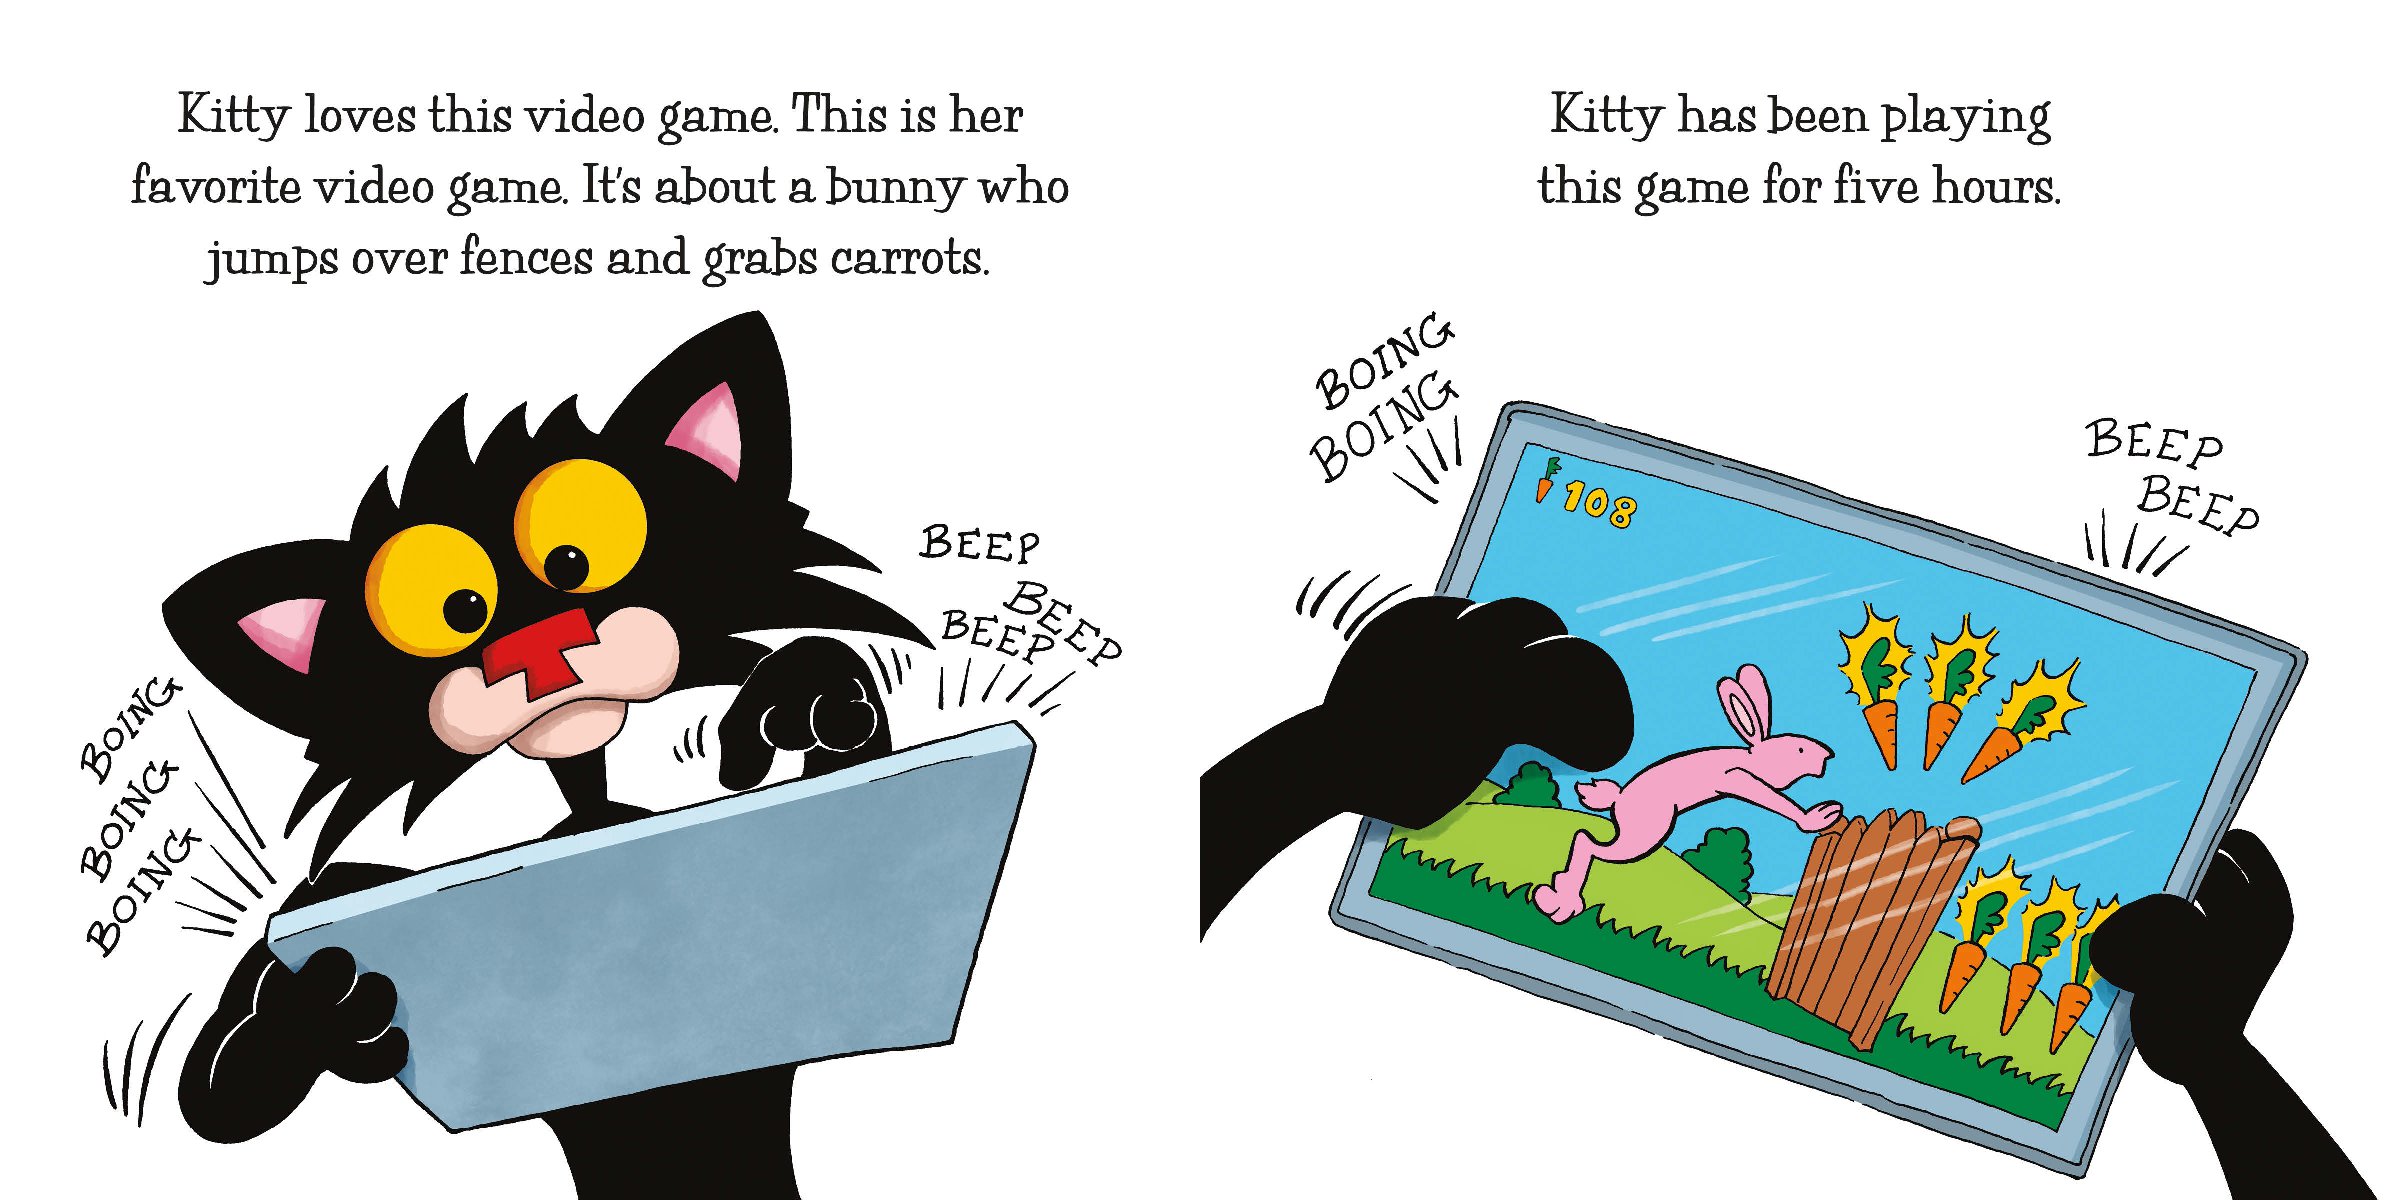 Bad Kitty Does Not Like Video Games